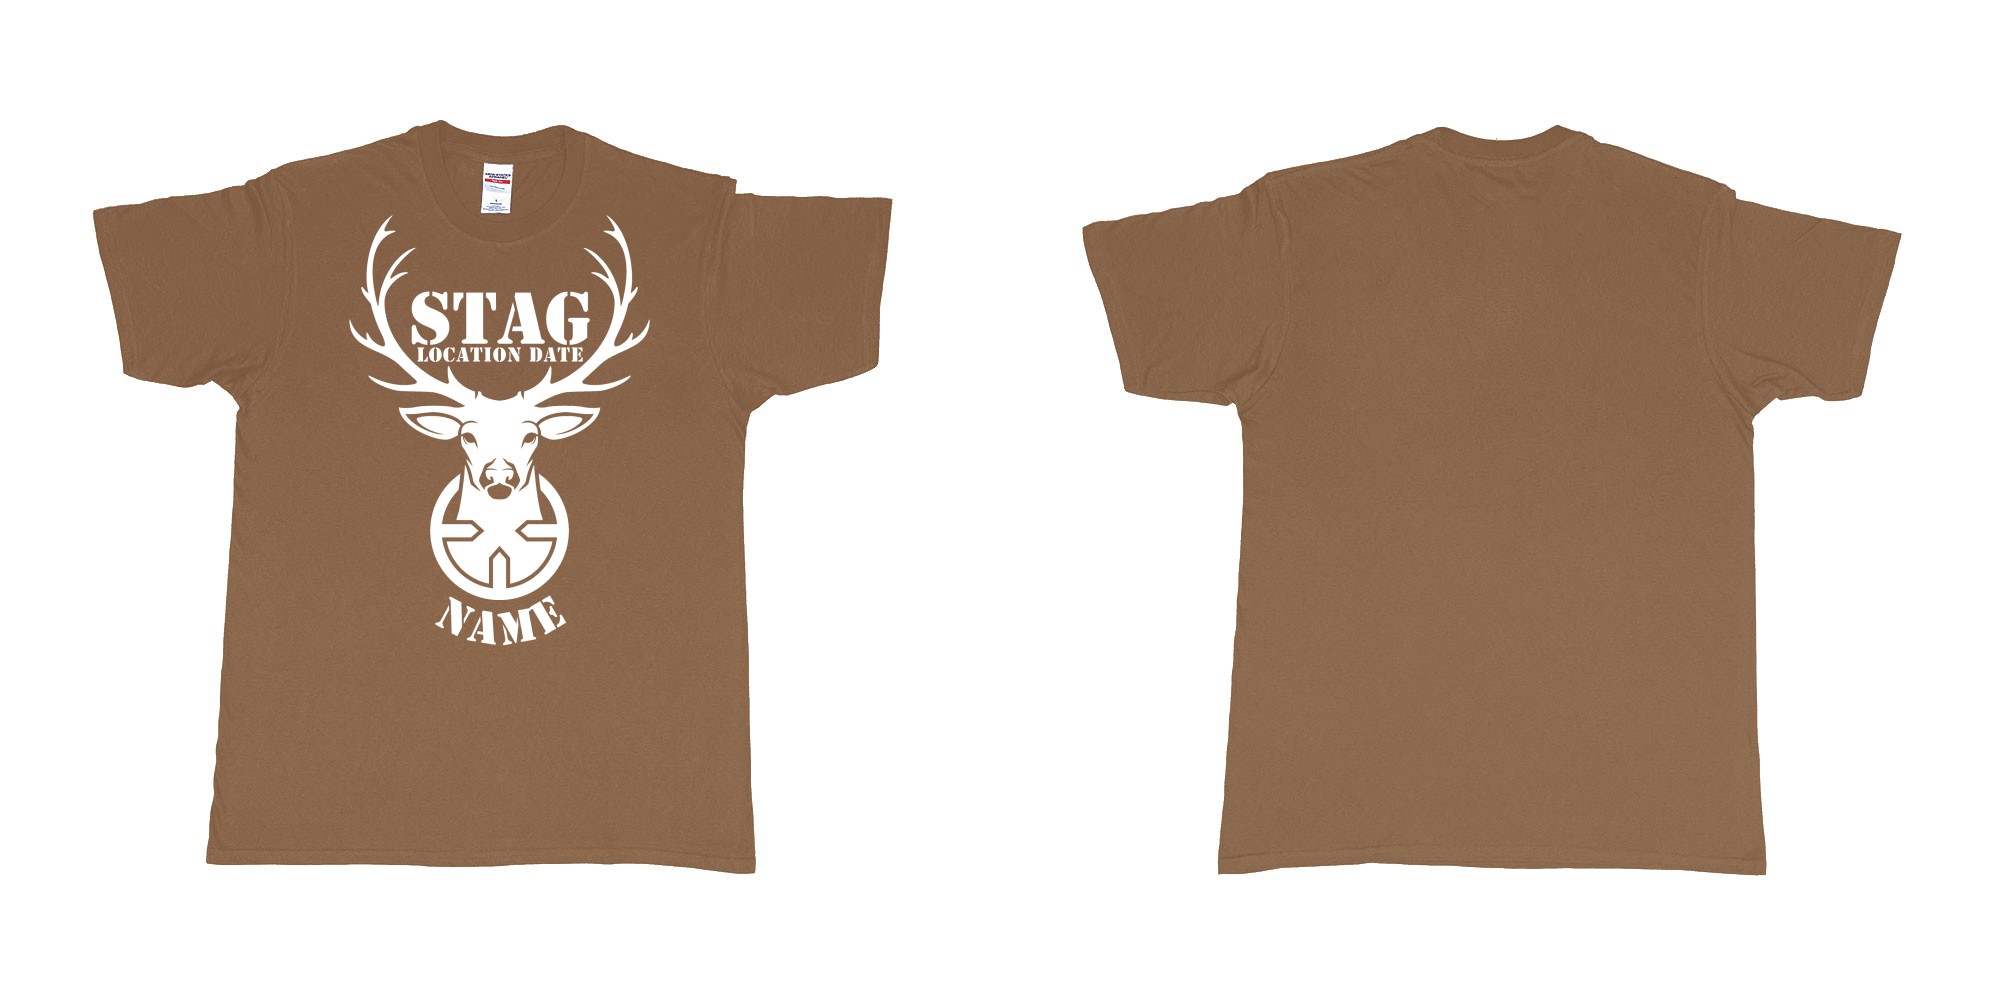 Custom tshirt design aiming for a stag custom tshirt print in fabric color chestnut choice your own text made in Bali by The Pirate Way